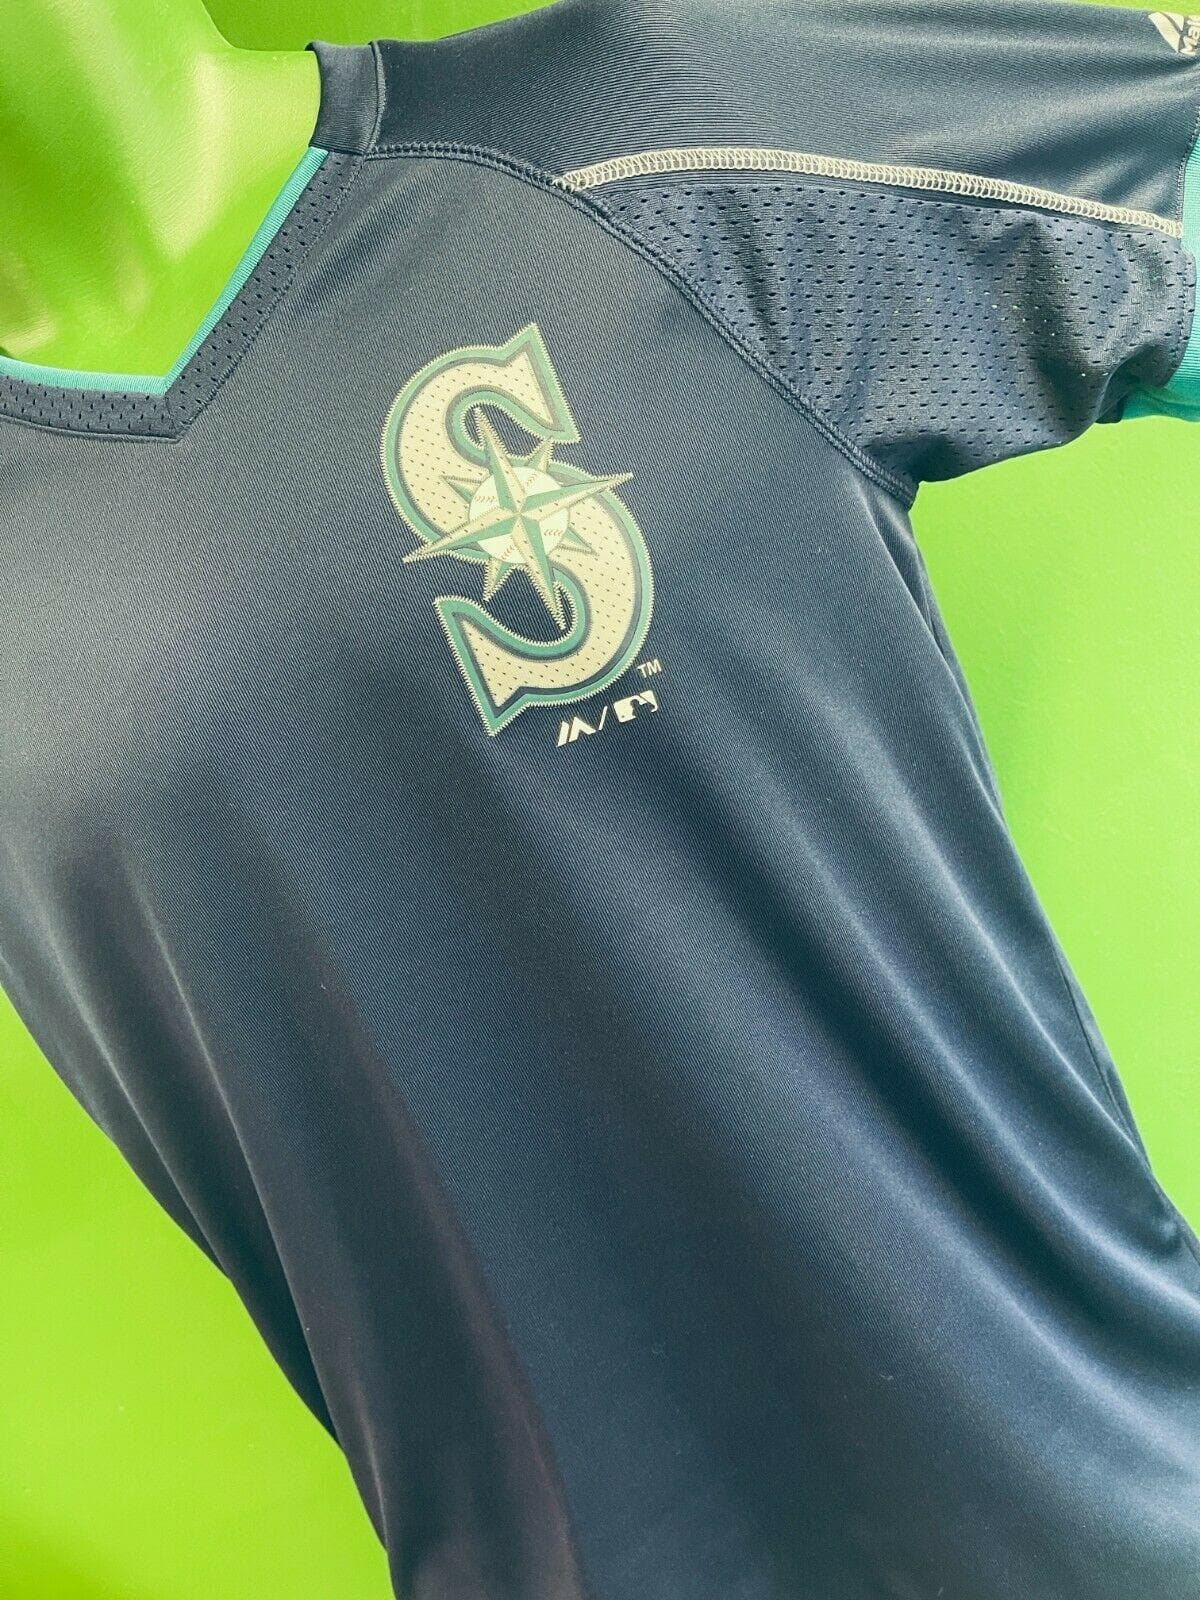 MLB Seattle Mariners Majestic Jersey-Style Top Youth Large 14-16